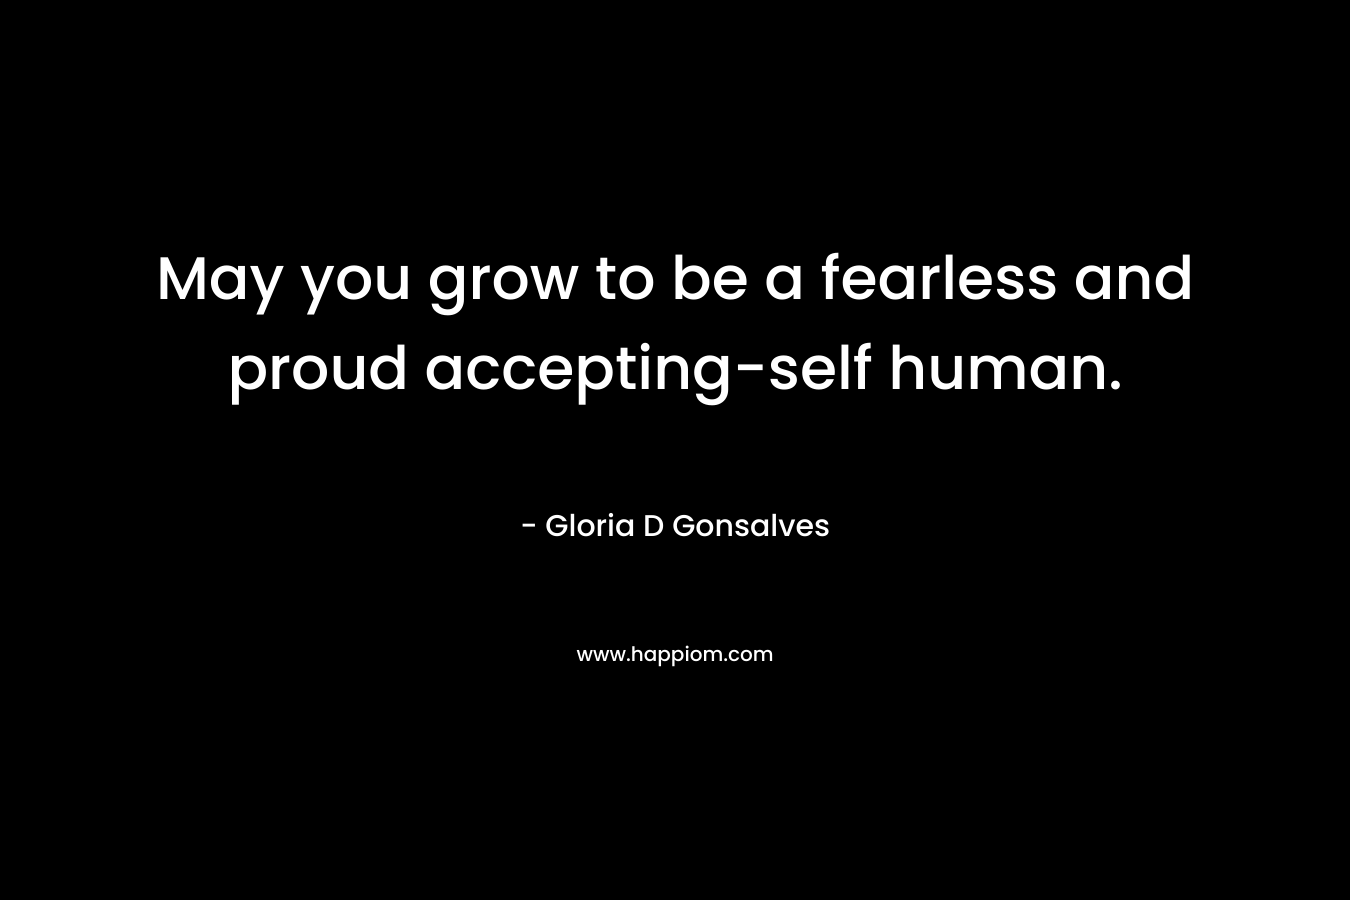 May you grow to be a fearless and proud accepting-self human.